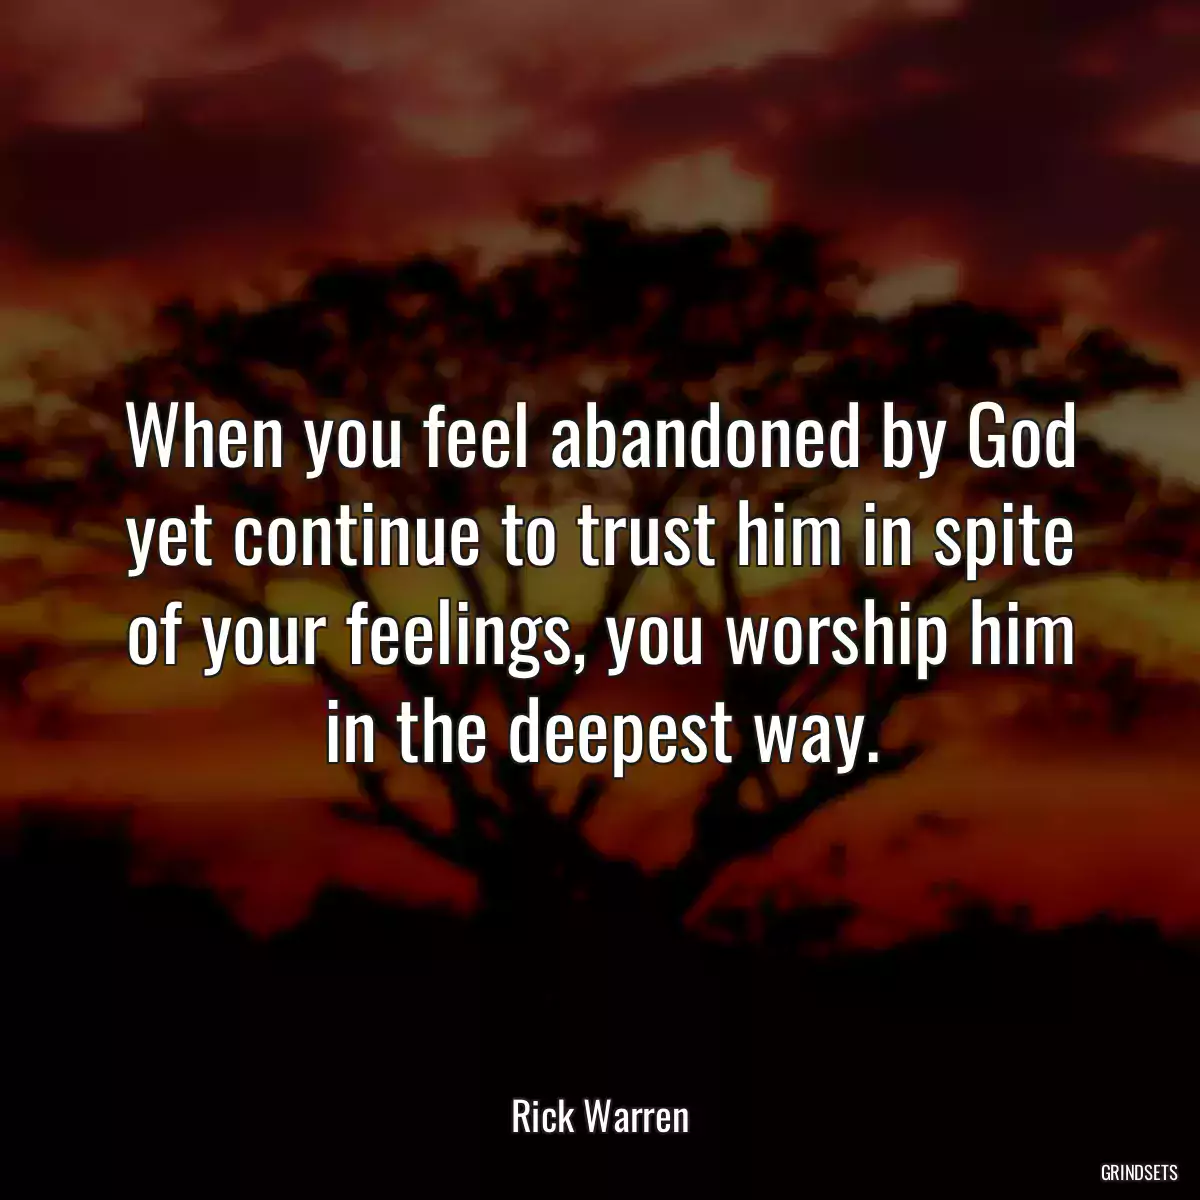 When you feel abandoned by God yet continue to trust him in spite of your feelings, you worship him in the deepest way.